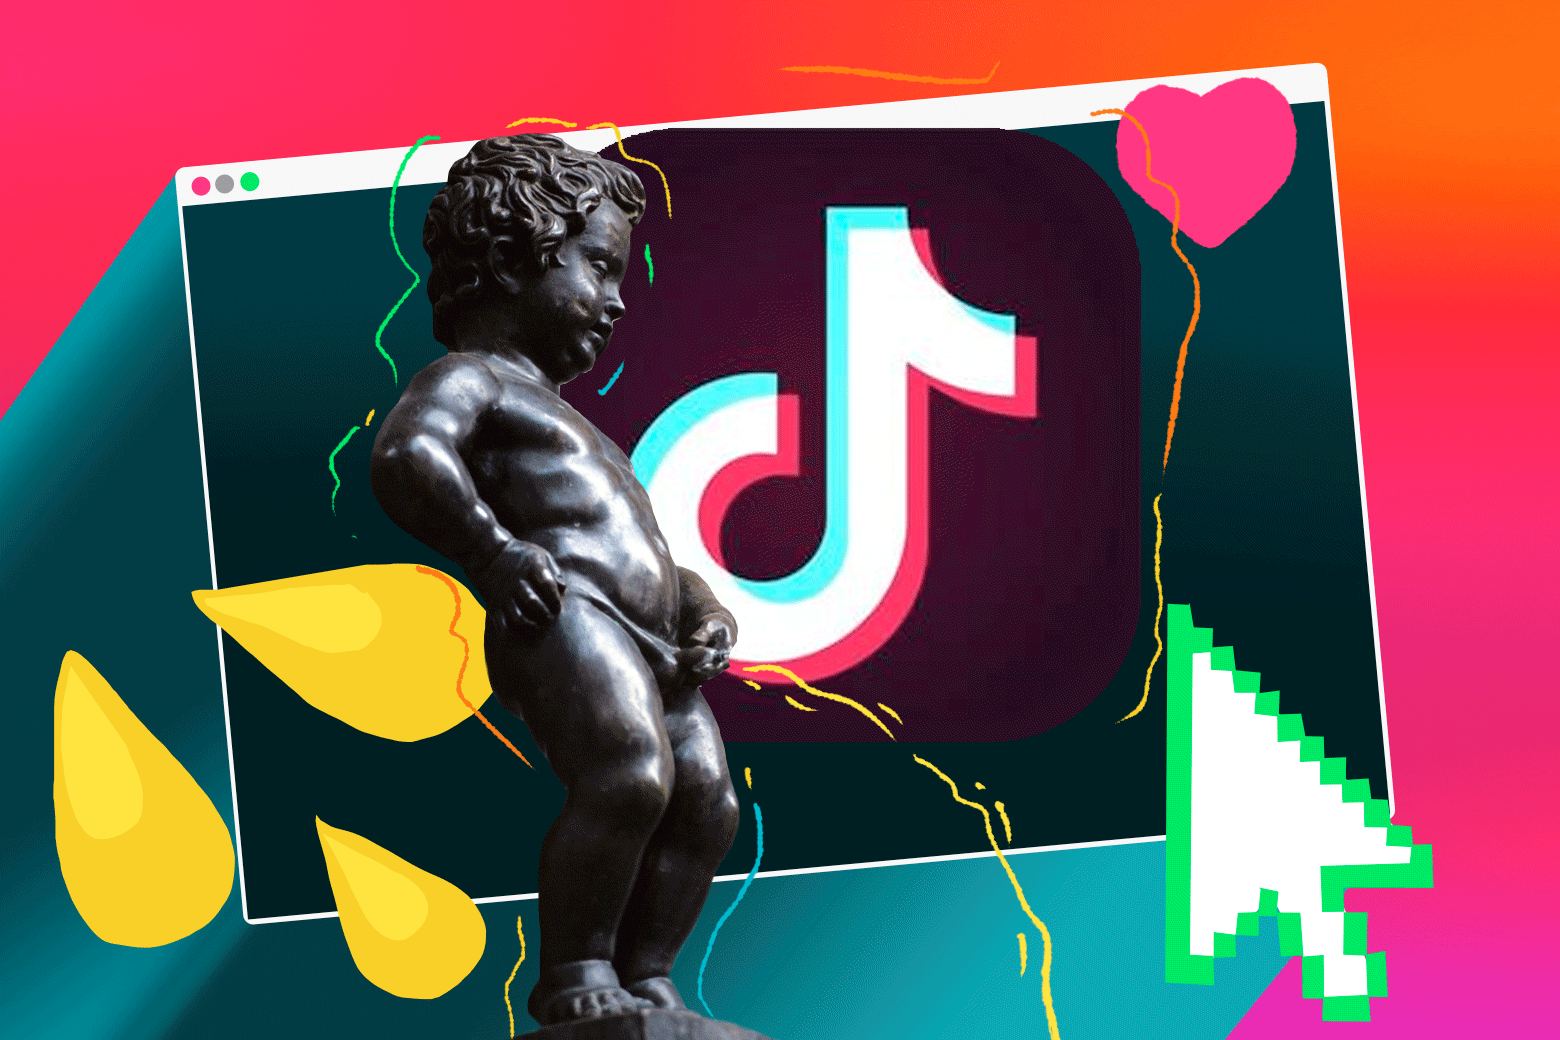 A happy collage including the TikTok logo, a heart, a mouse cursor, some yellow droplets, and one of those statues of a baby, peeing